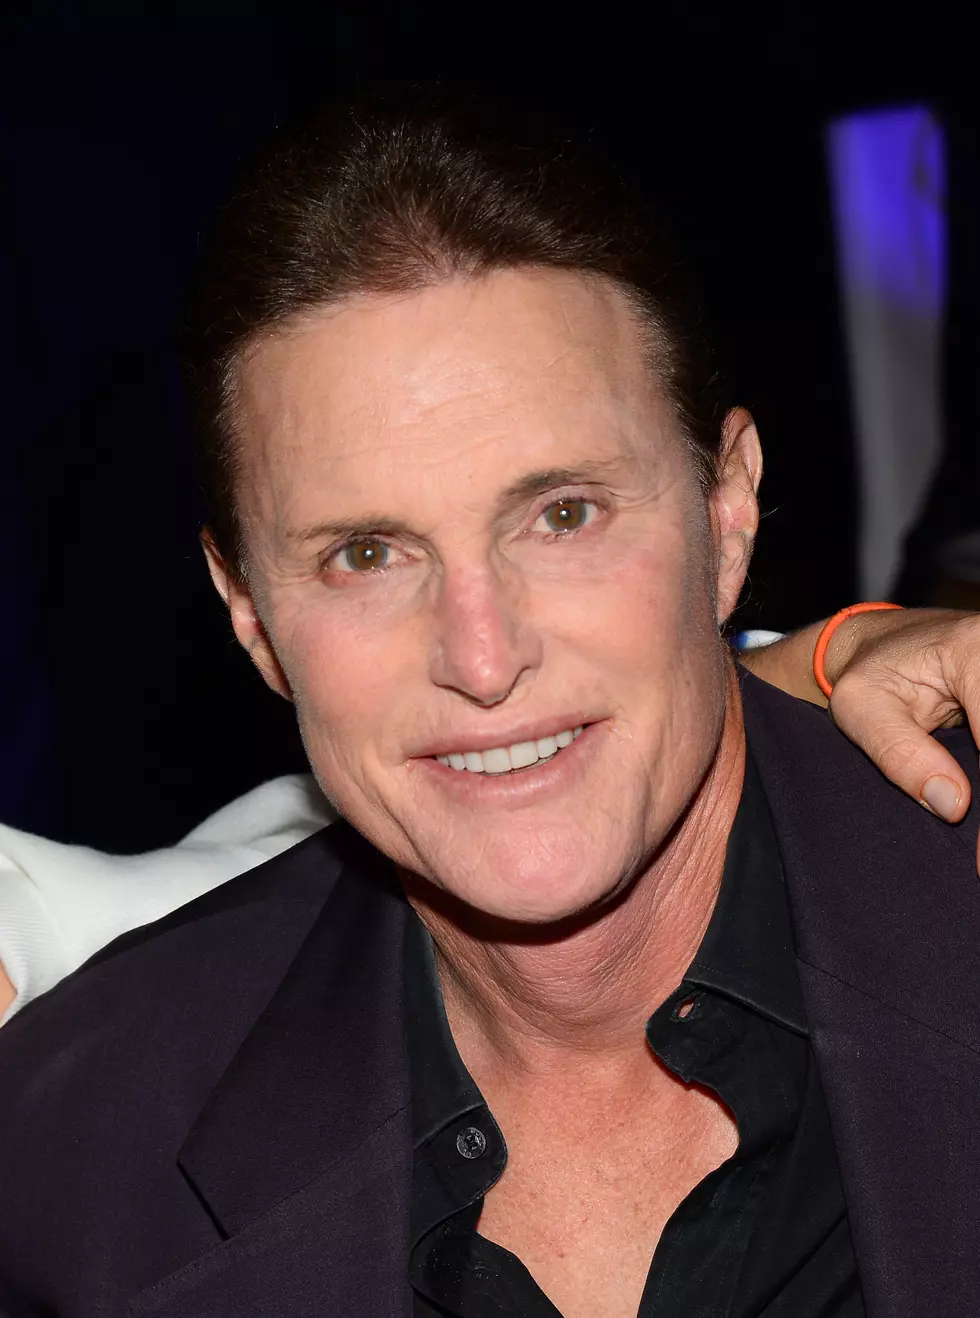 Now that Bruce Jenner is Wearing a Bra, Does That Prove He’s Becoming a Woman? [POLL]